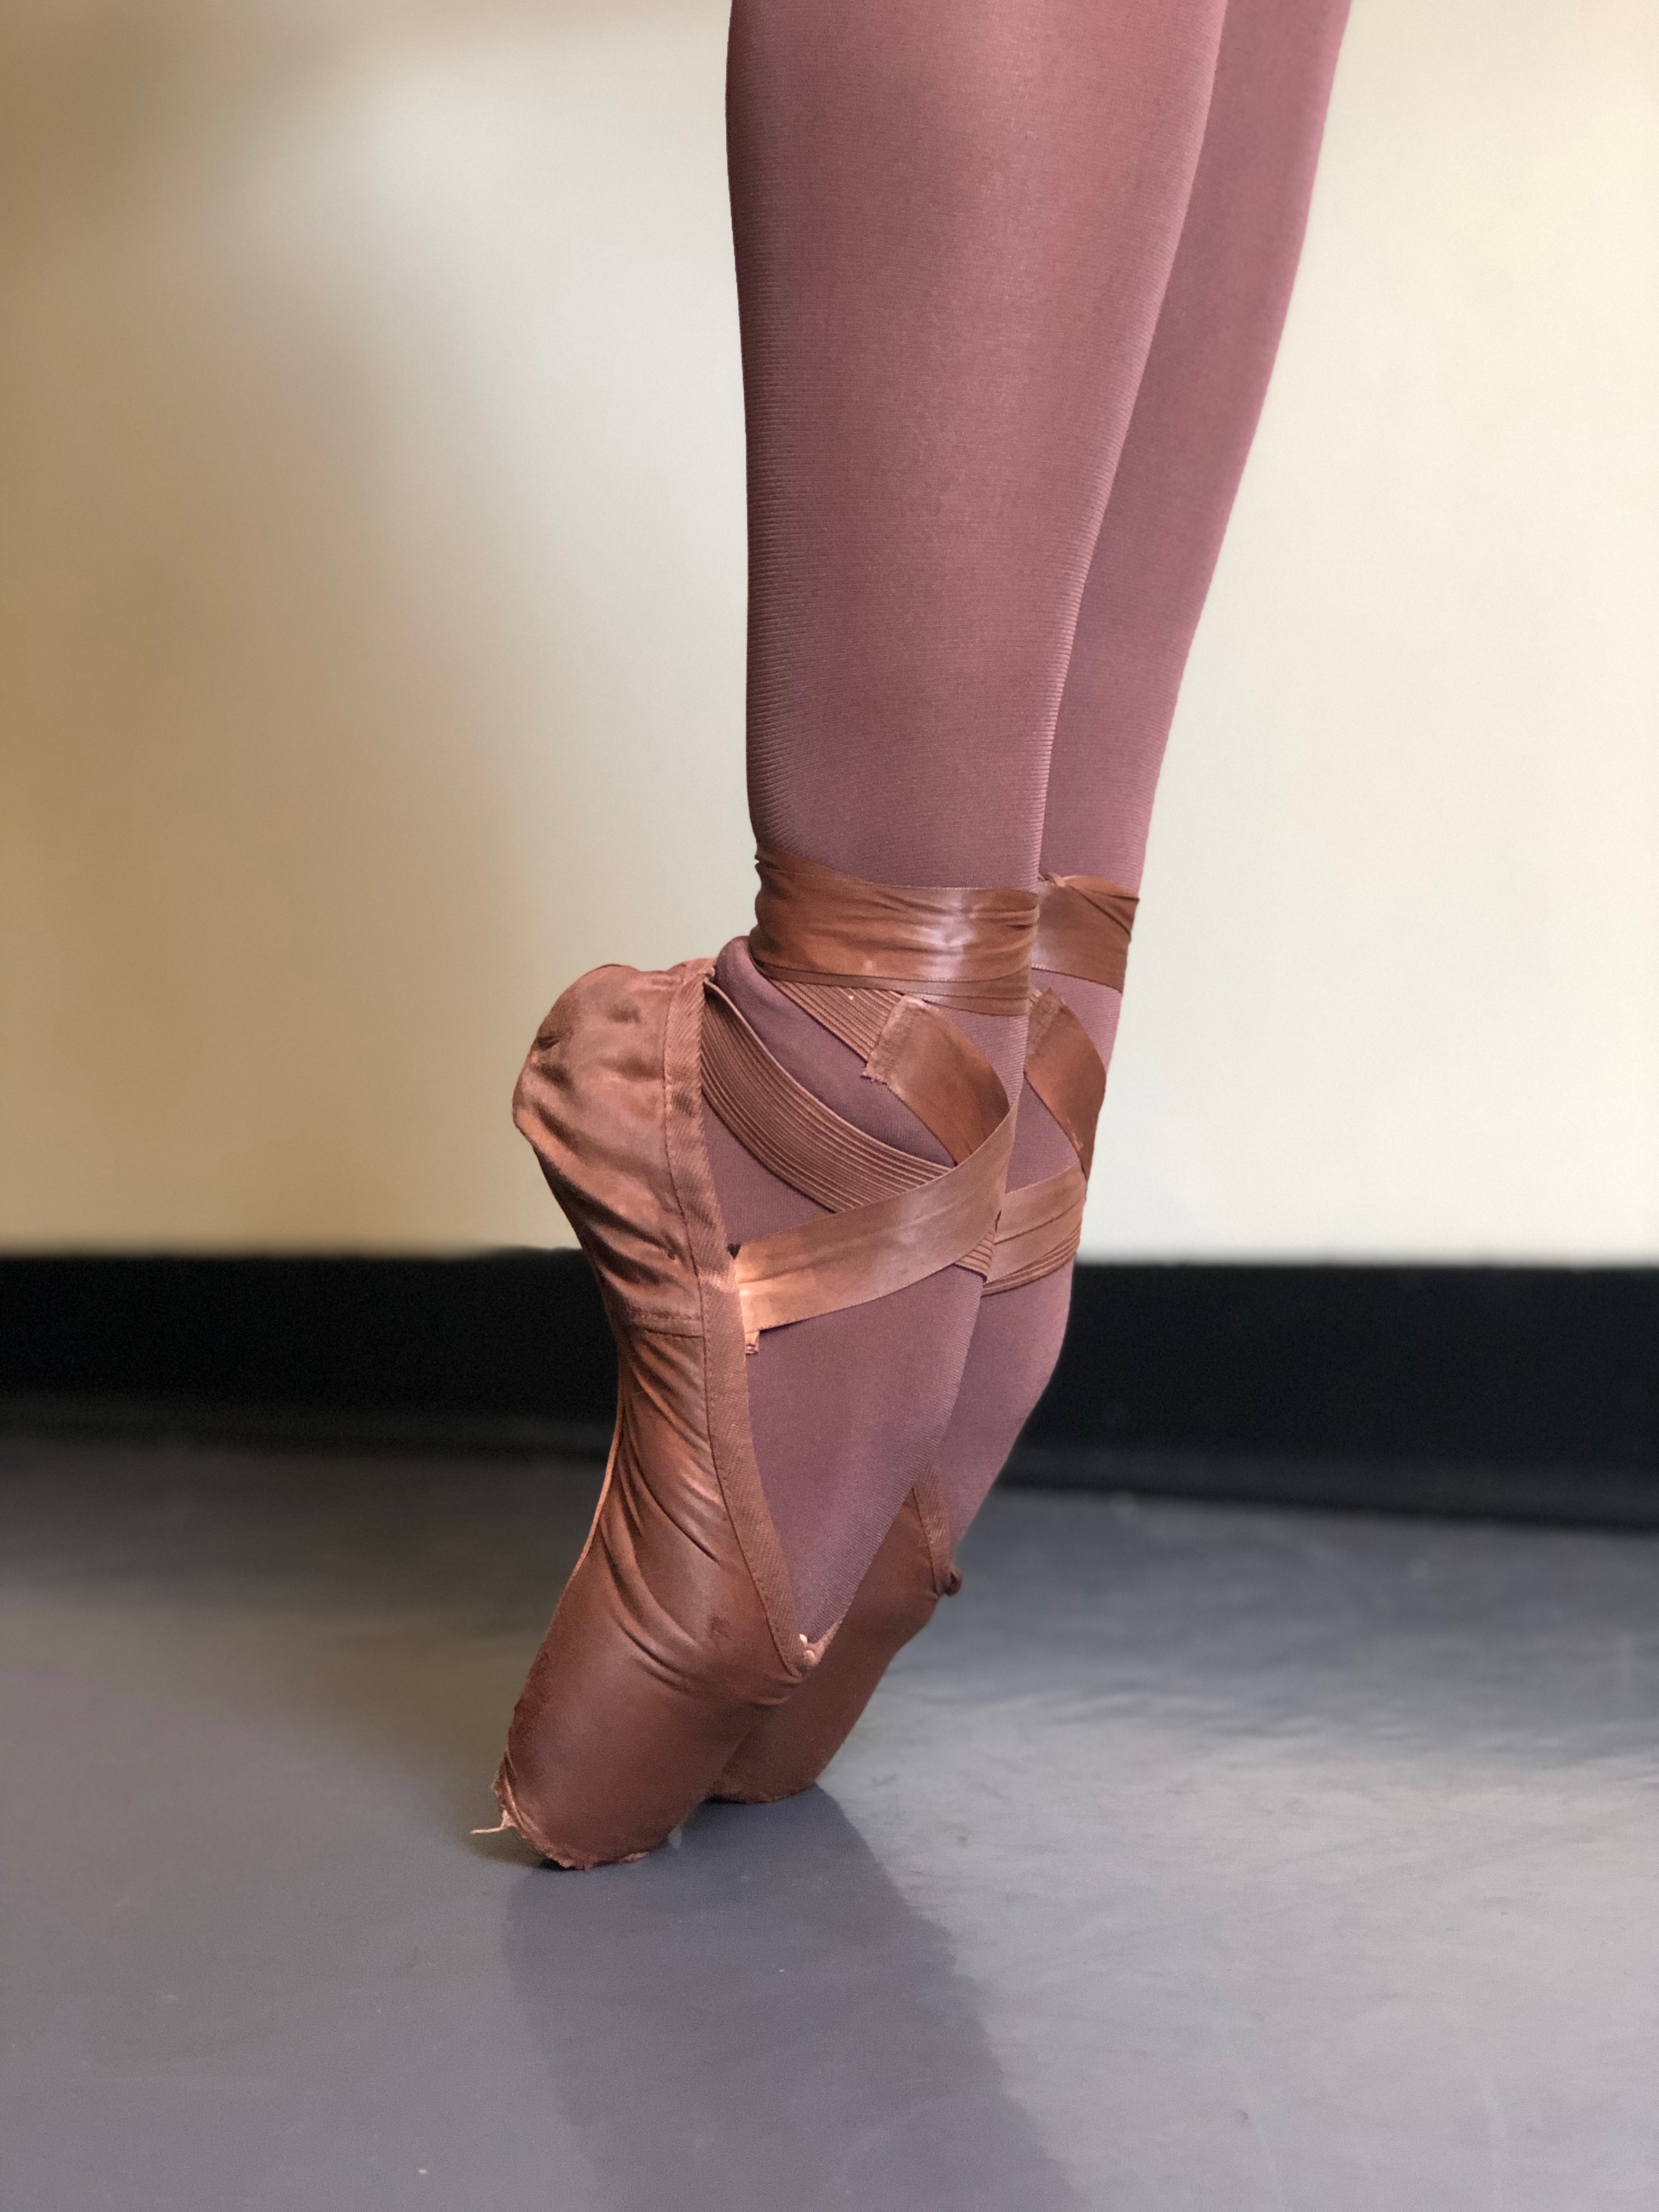 Flesh-Toned Ballet Shoes Will Soon Be Available for People of Color, Smart  News